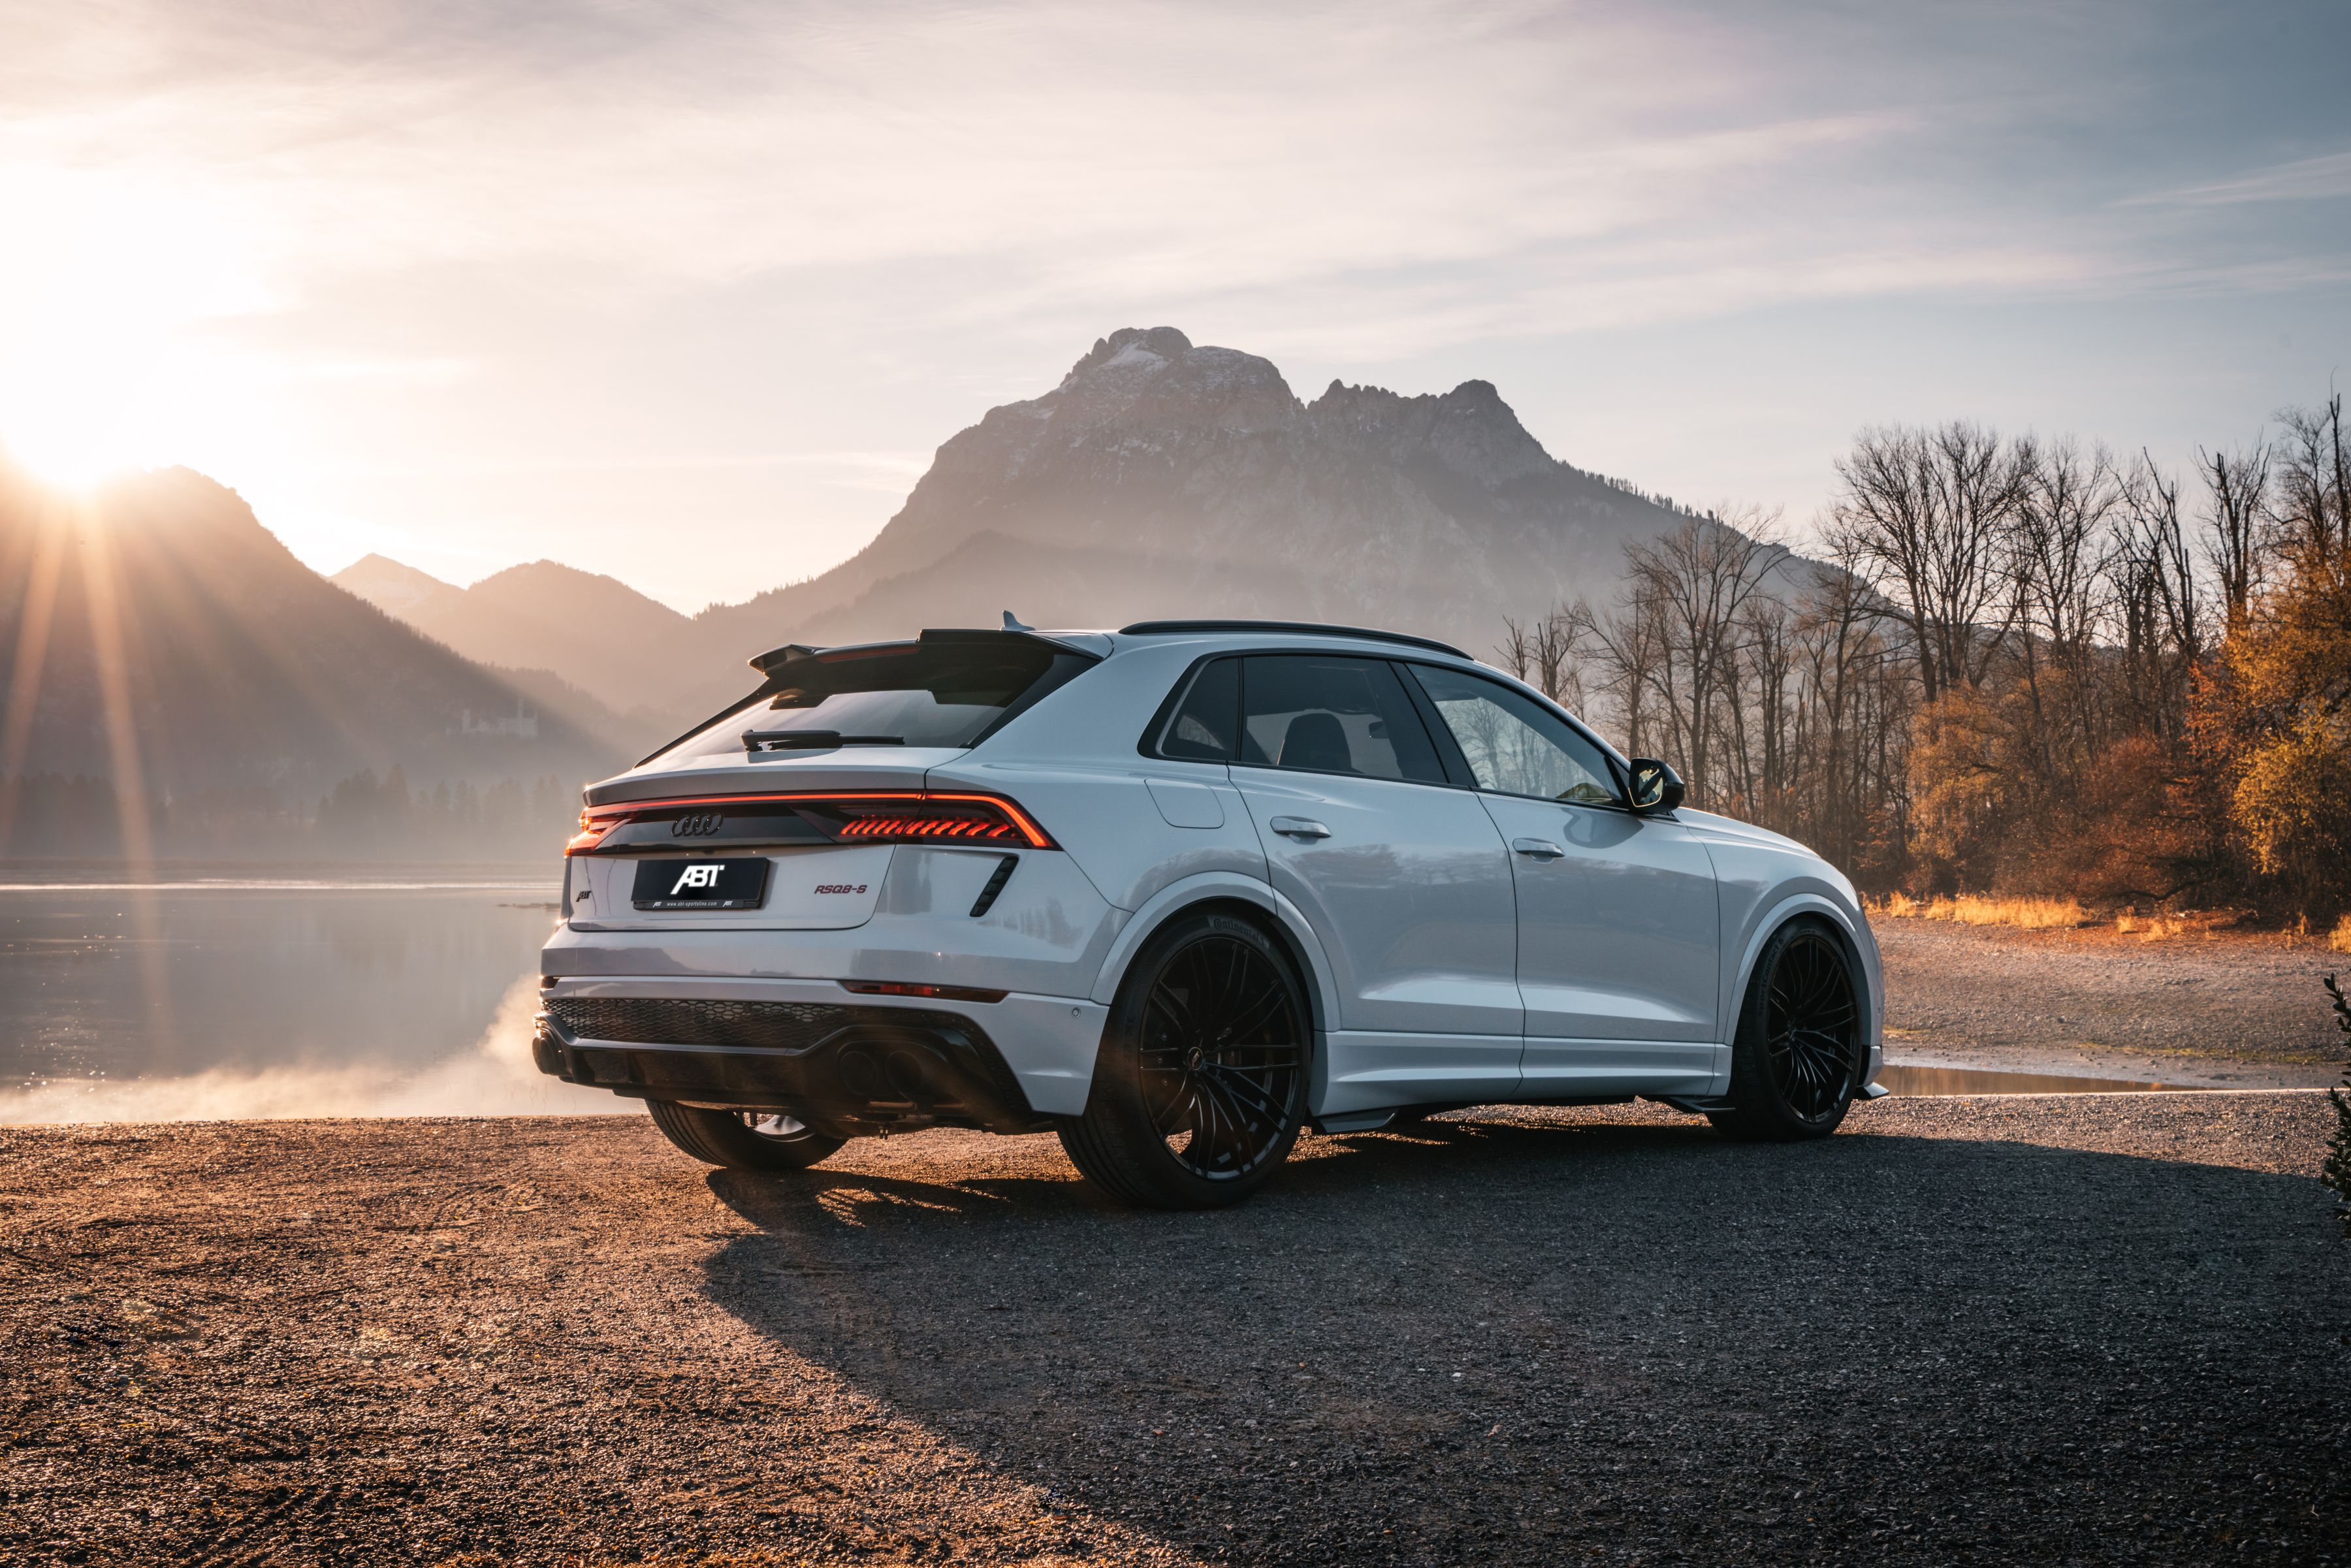 2022 Audi RSQ8-S by ABT